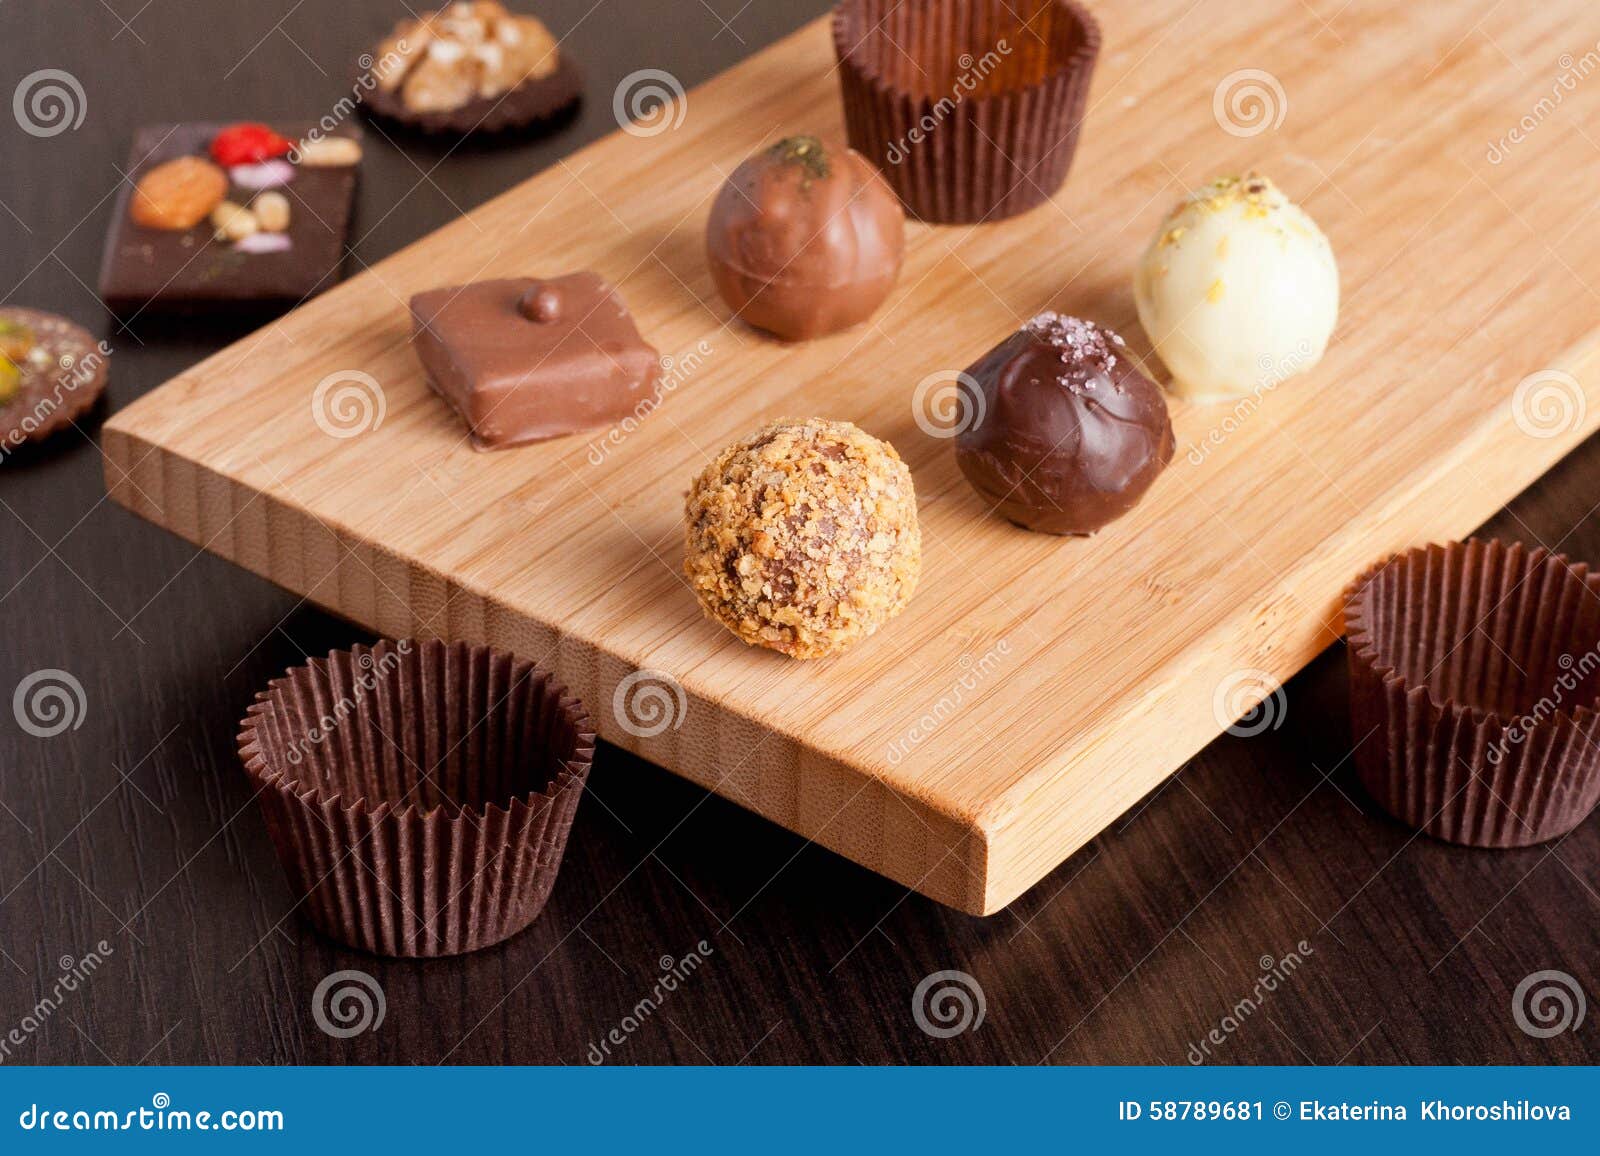 picture of candy on kitchen table